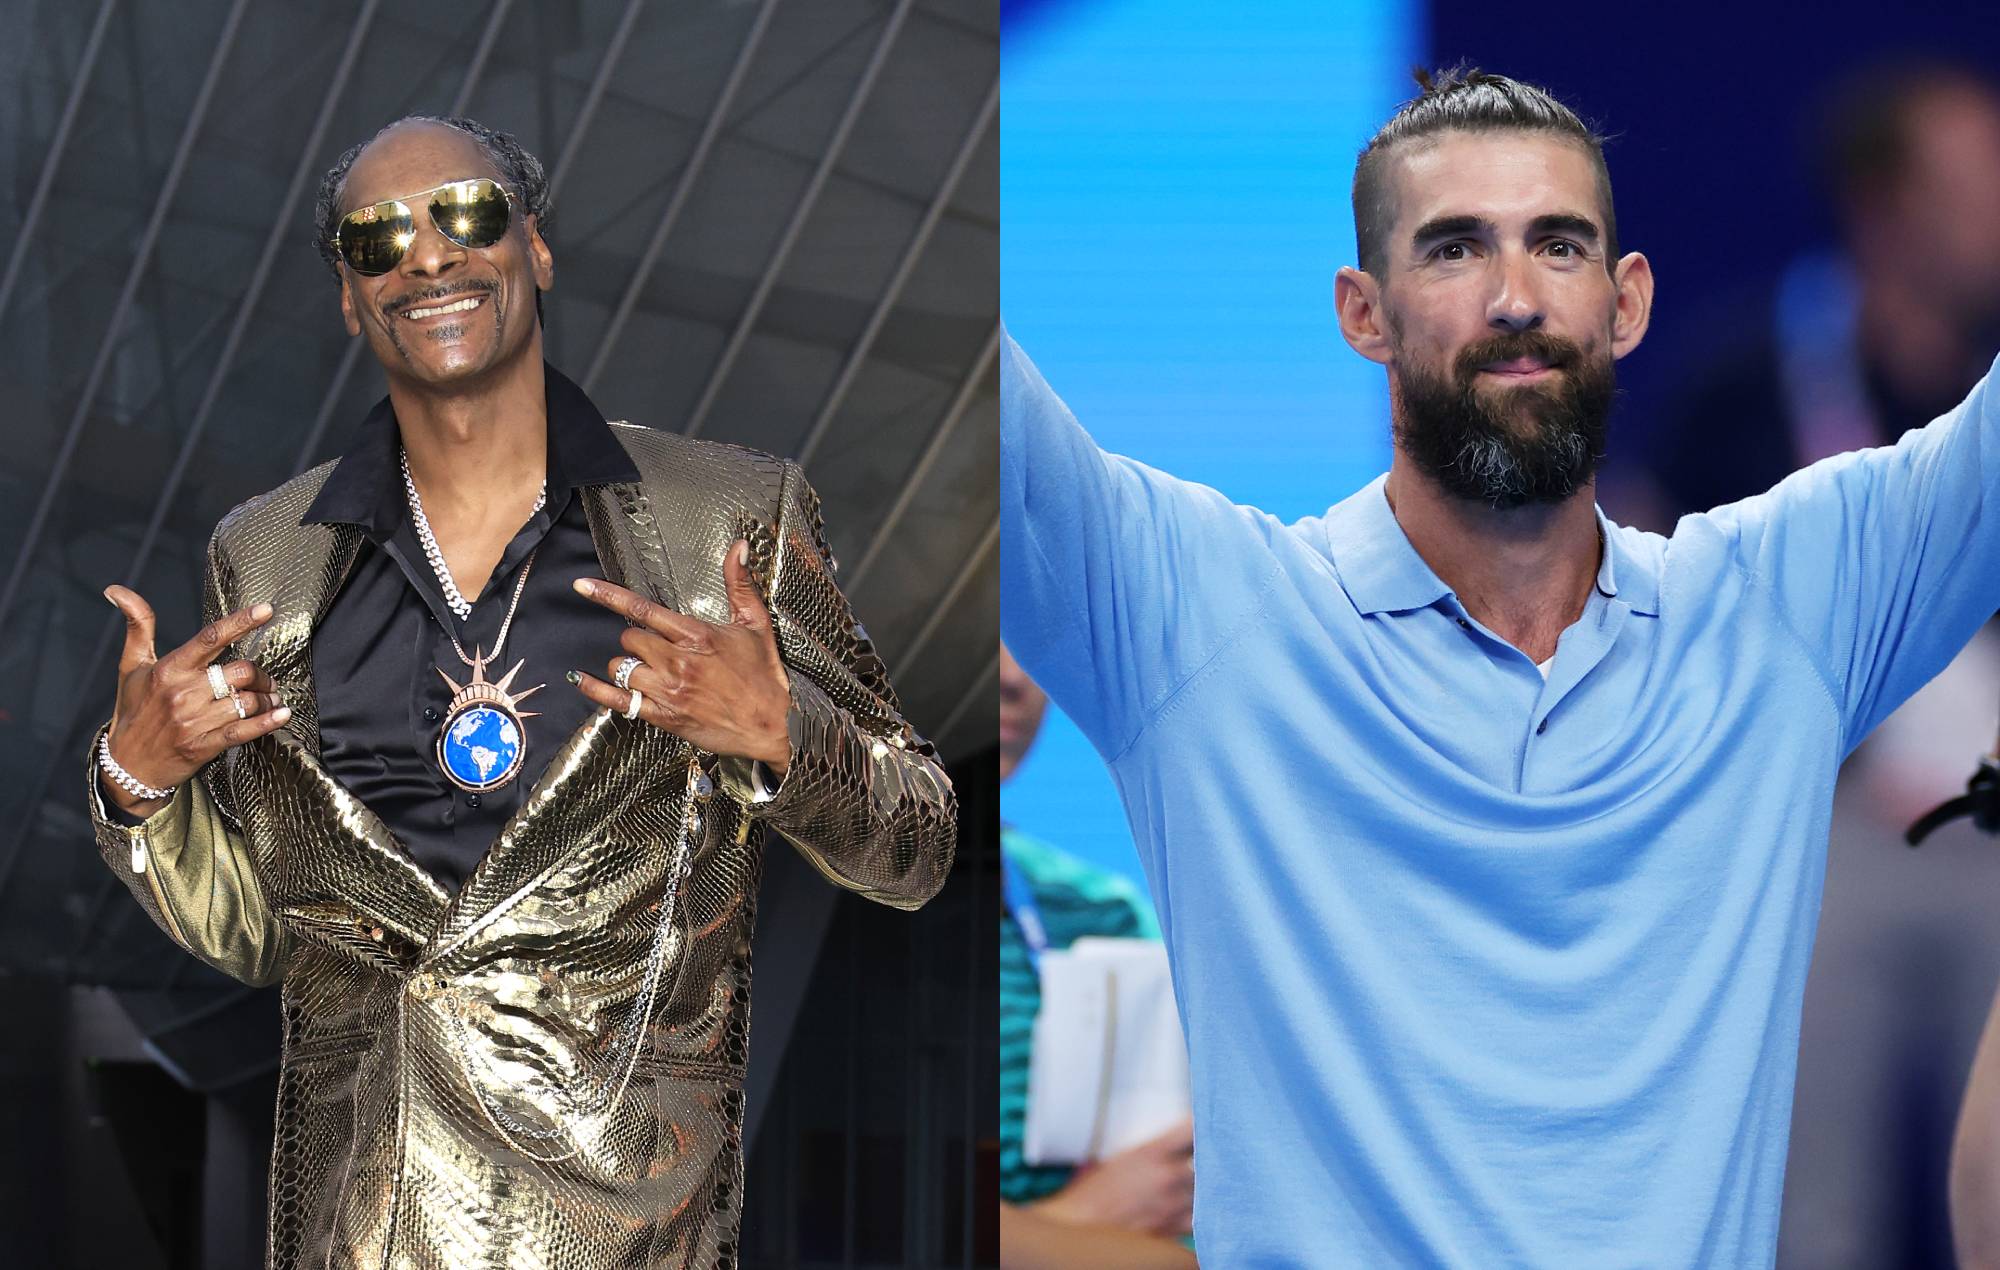 Watch Snoop Dogg go swimming with Michael Phelps at Paris 2024 Olympics